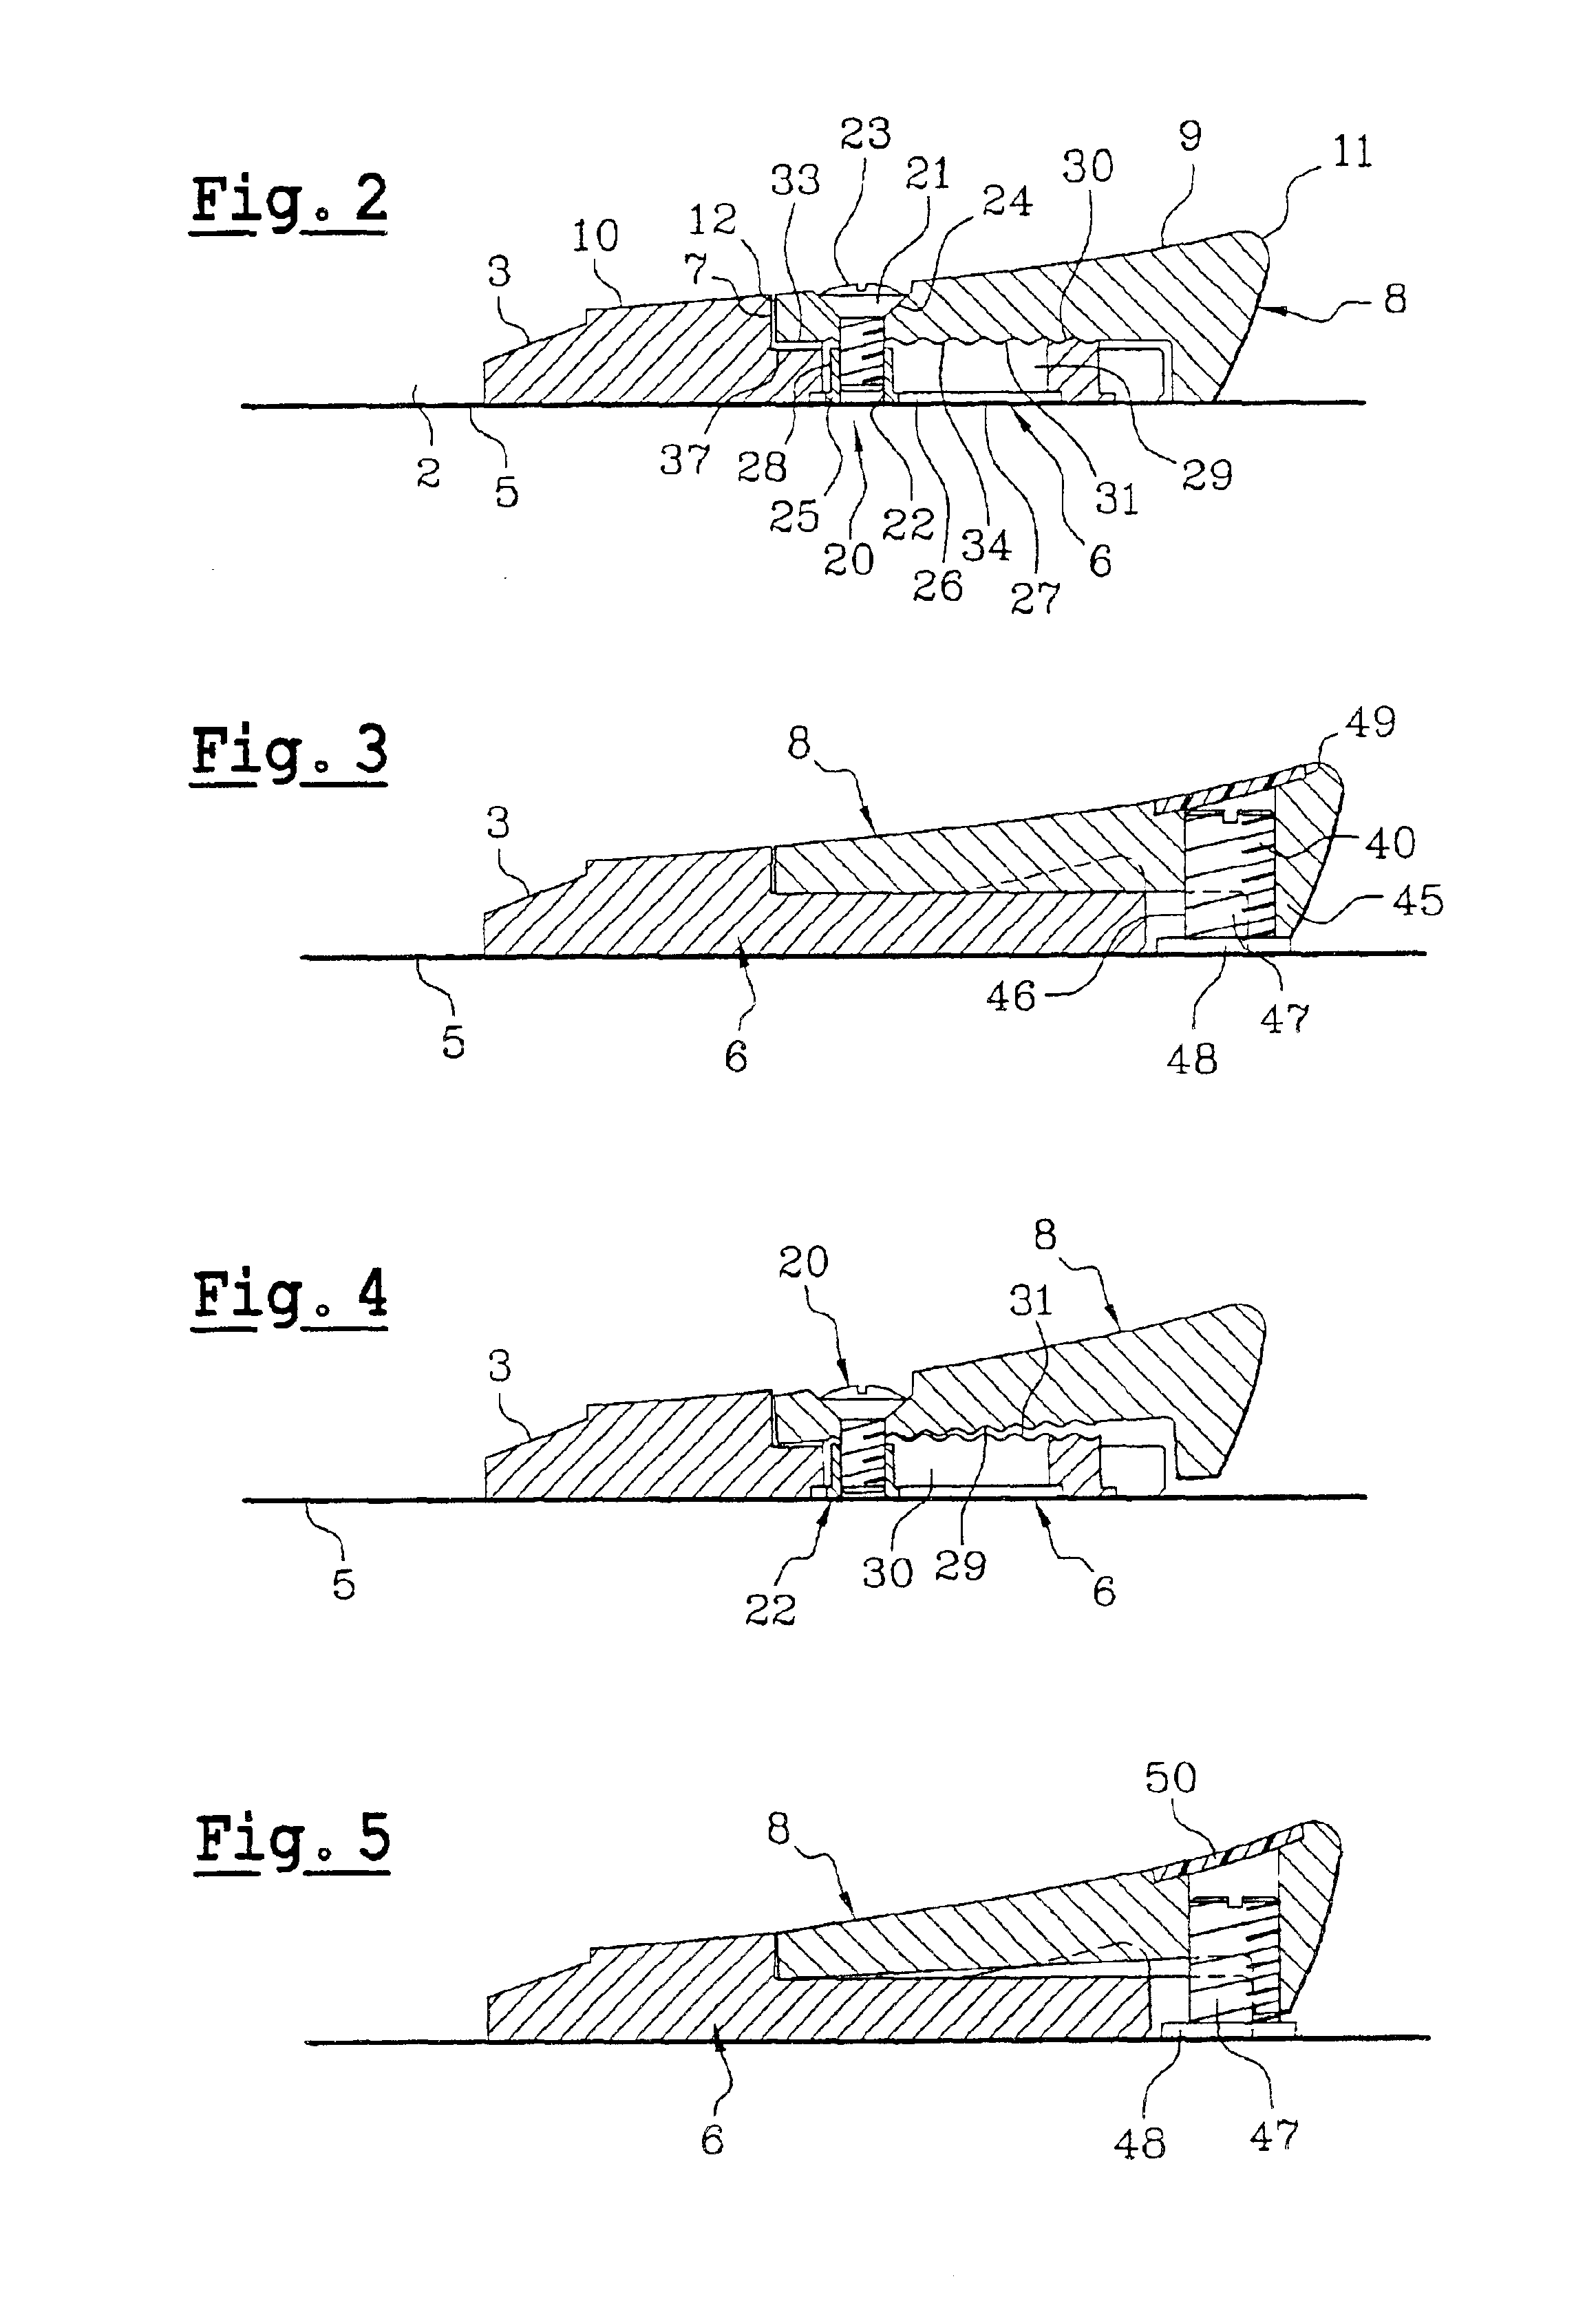 Element forming an inclined wedge used in a snowboard binding